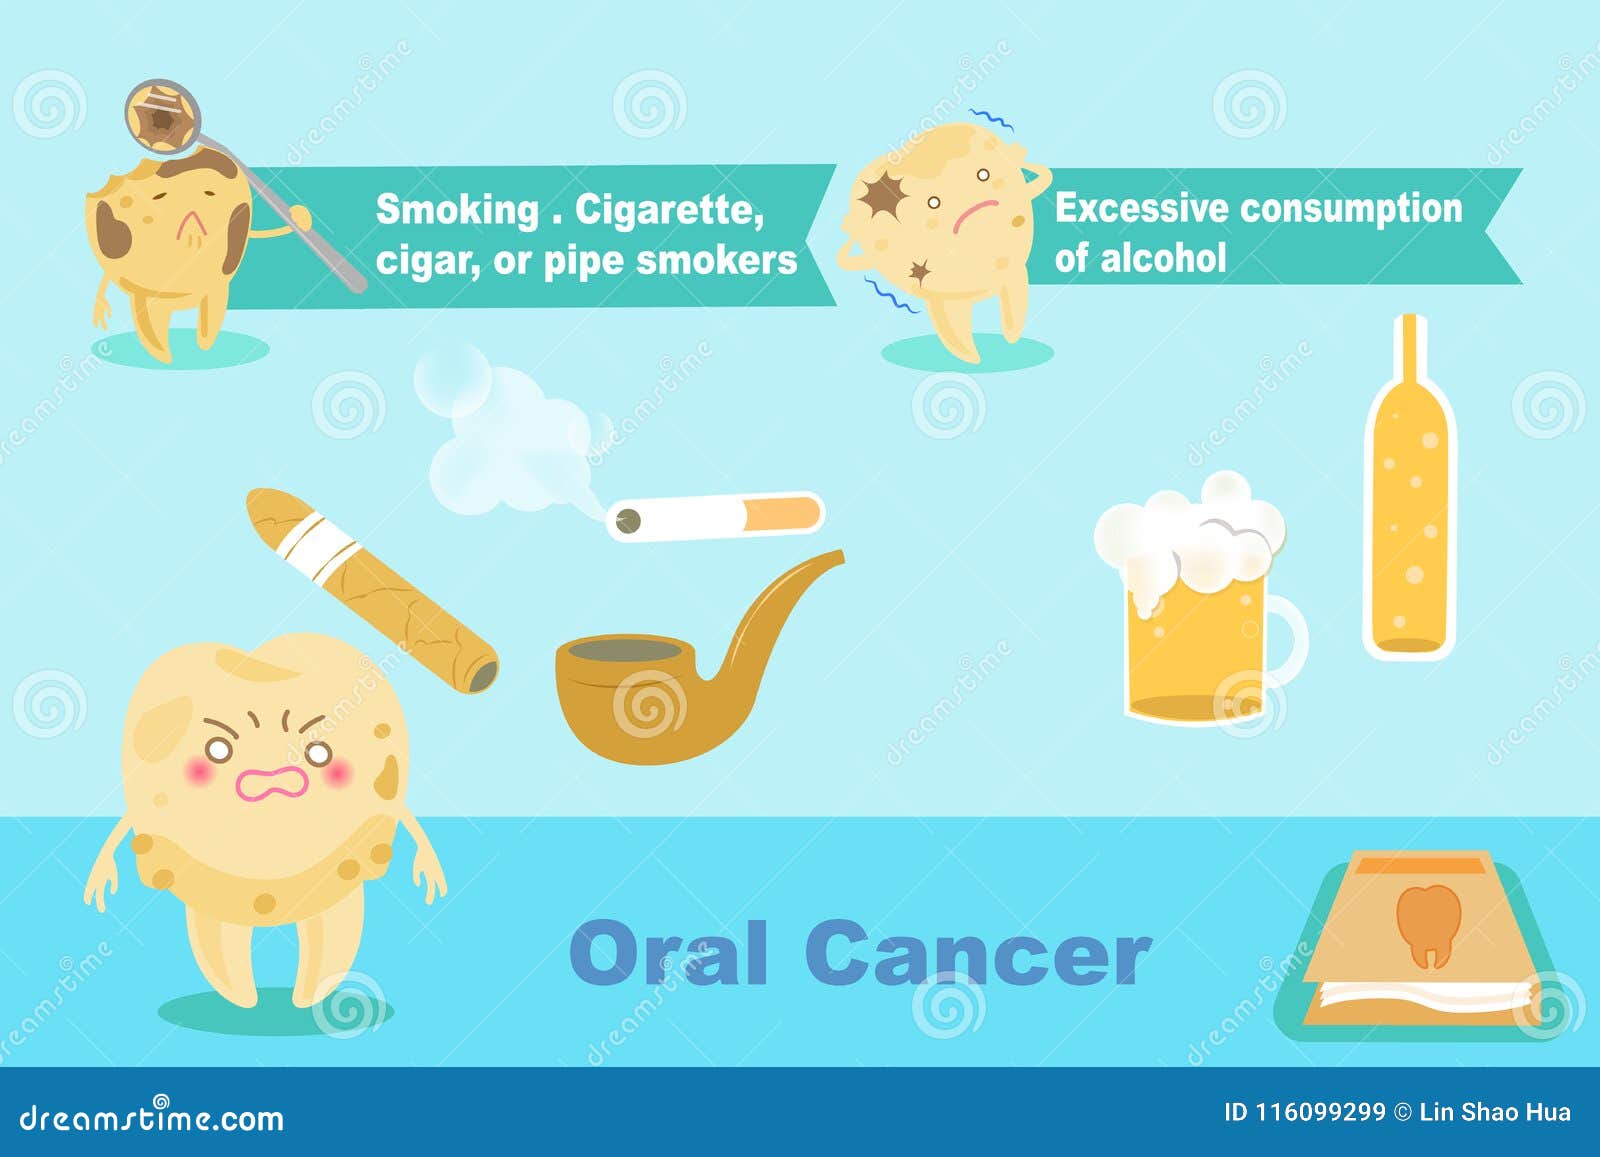 tooth with oral cancer